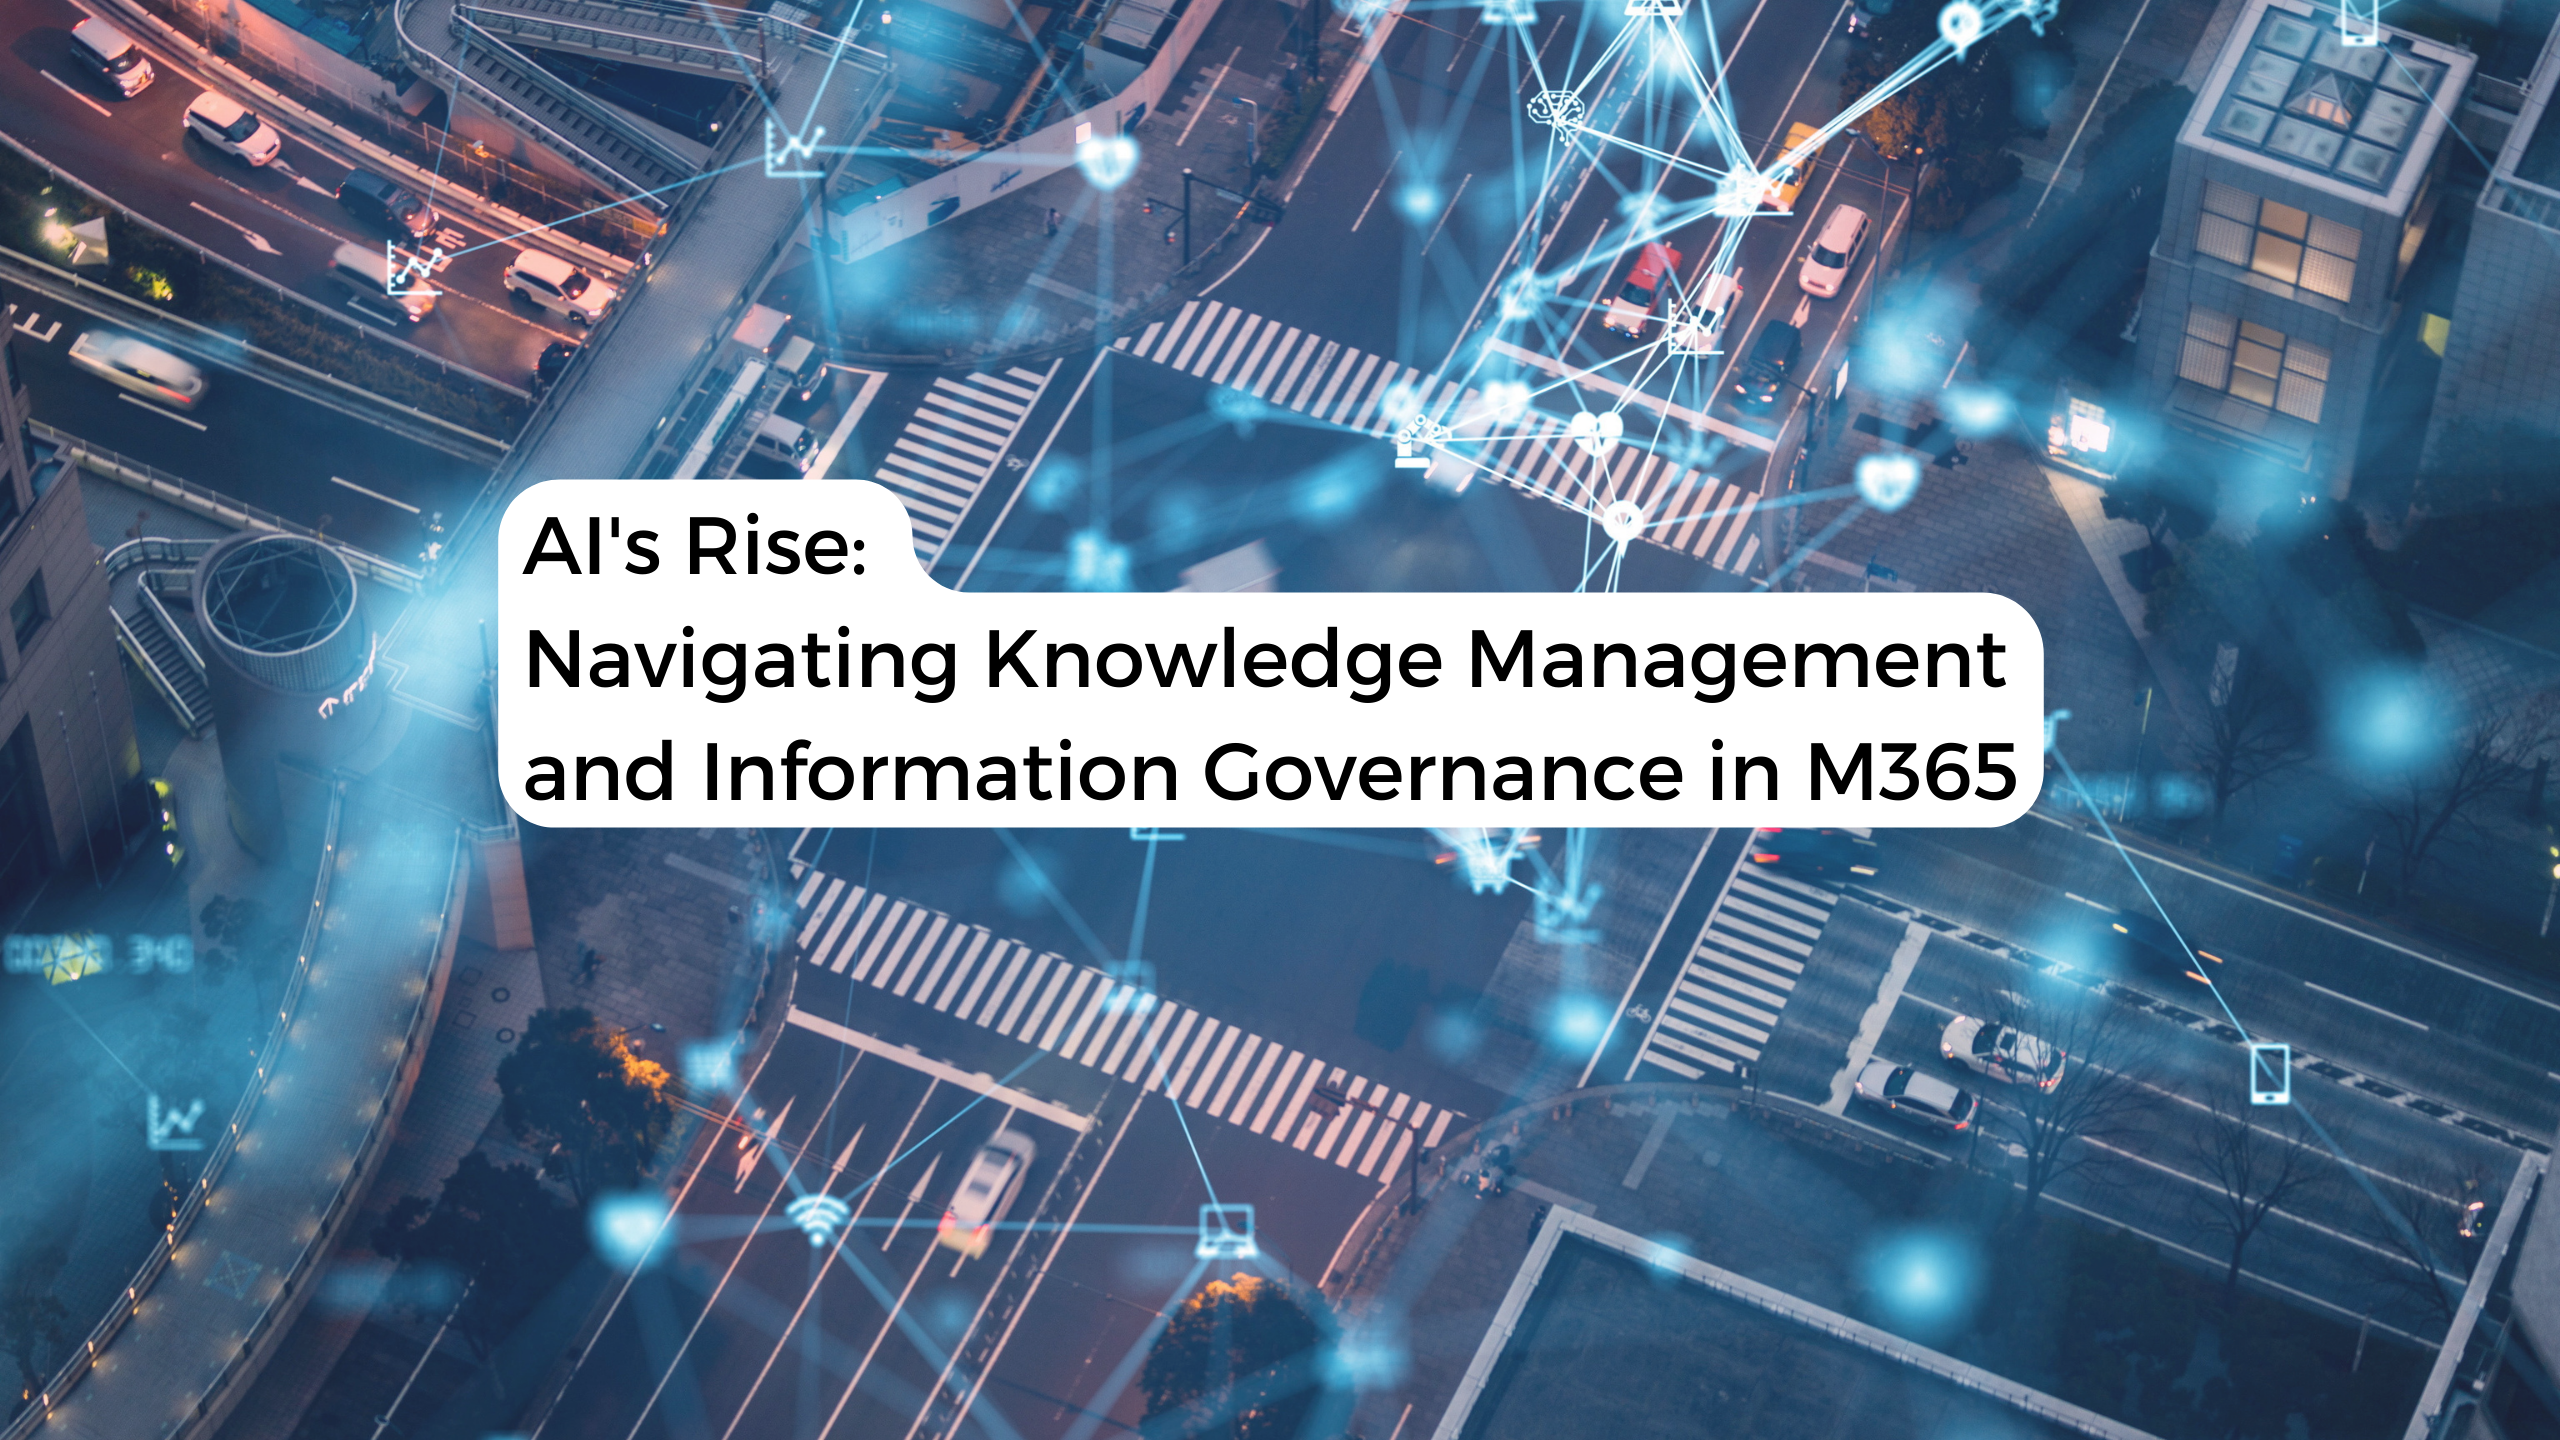 You are currently viewing AI’s Rise: Navigating Knowledge Management and Information Governance in M365